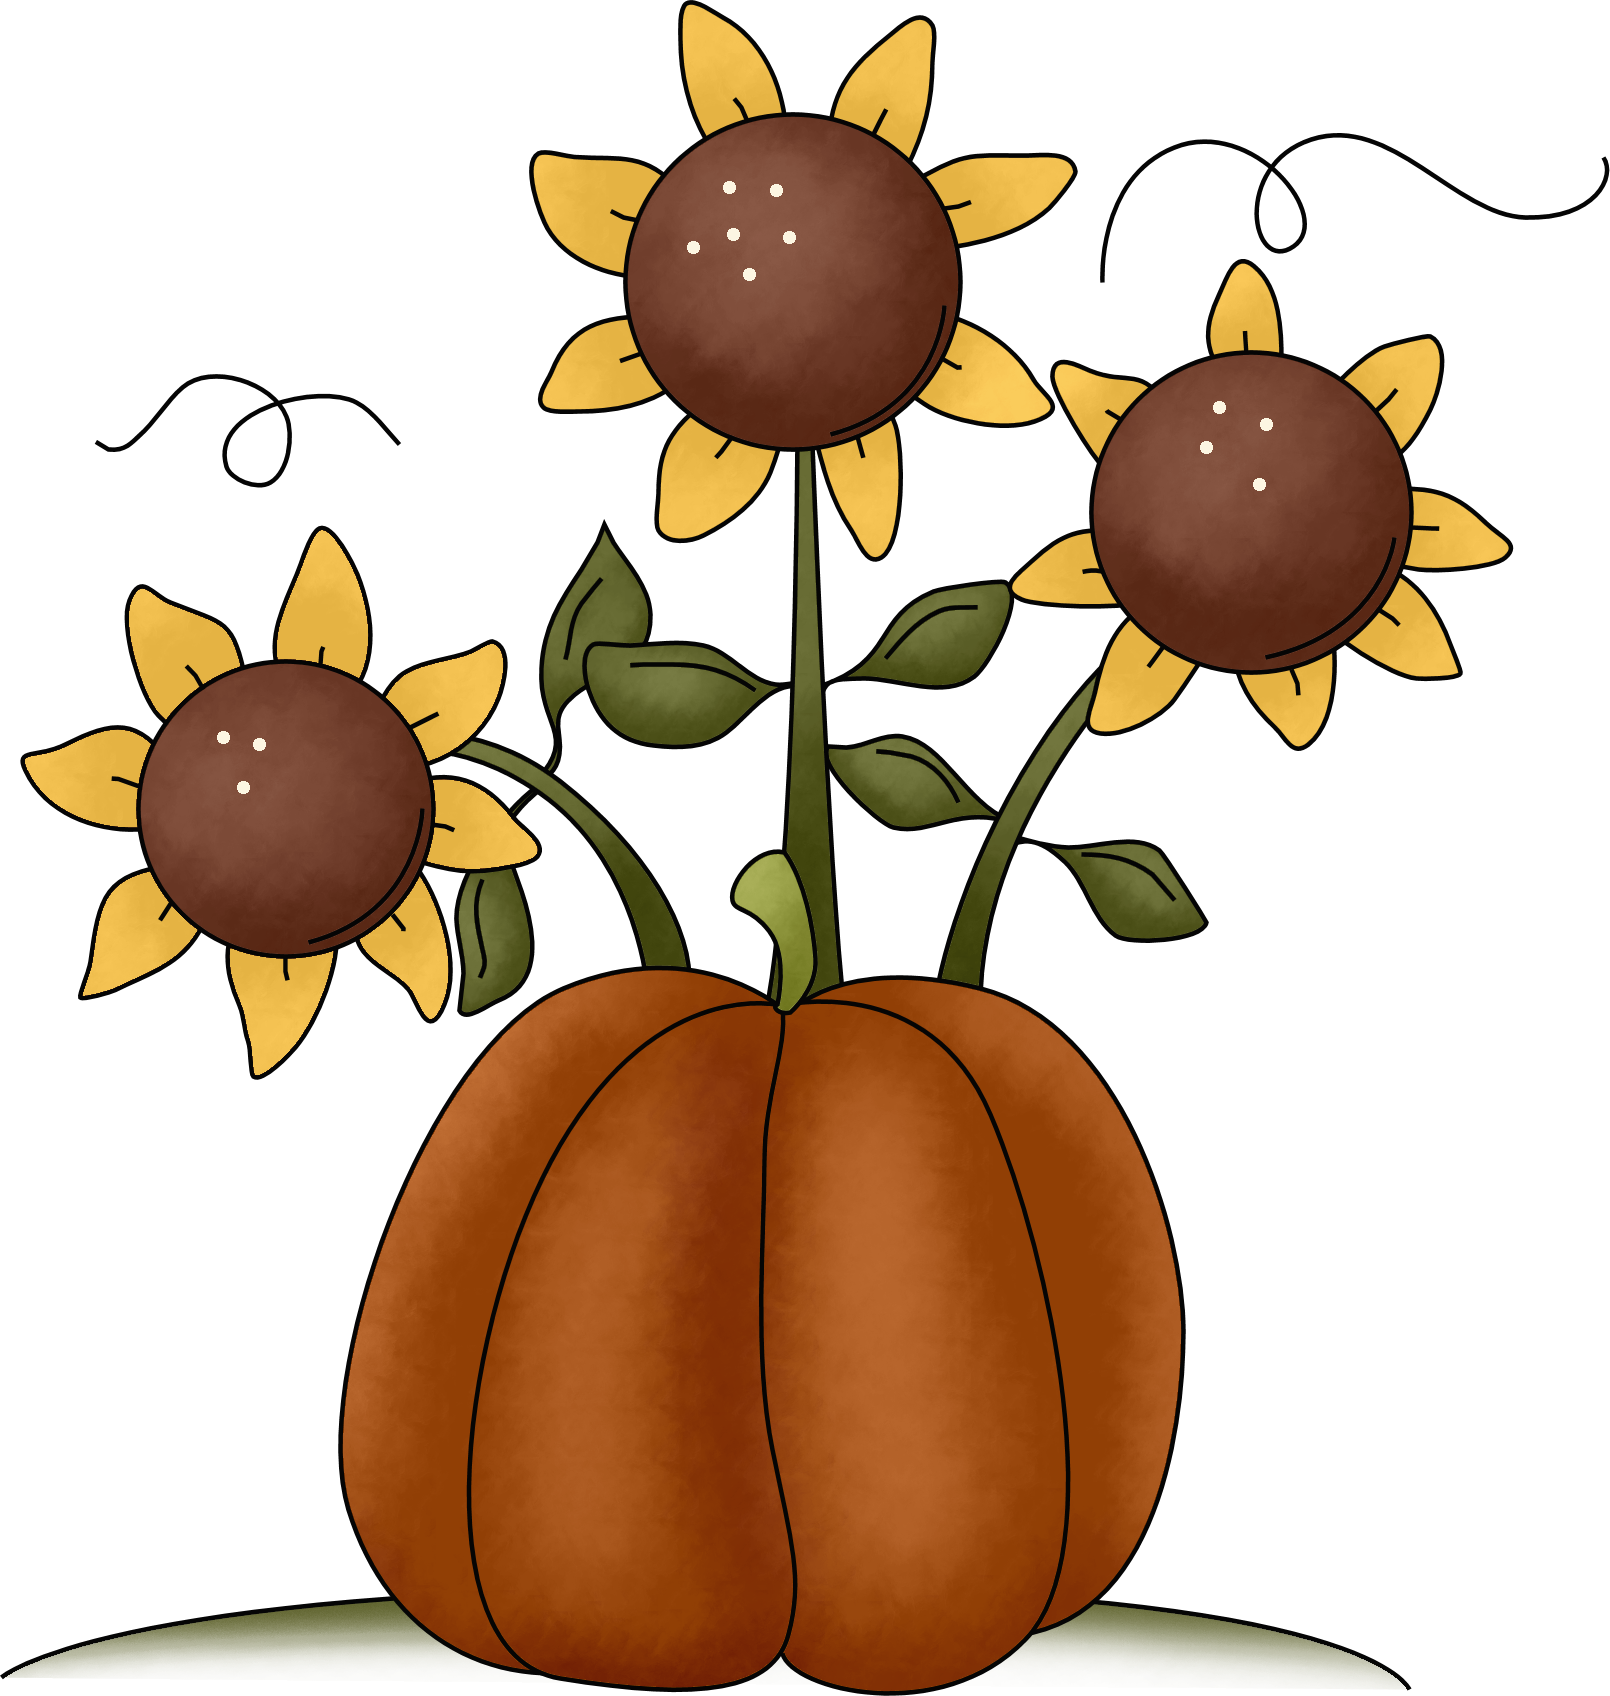 pumpkin-and-sunflower-clipart-free-20-free-cliparts-download-images